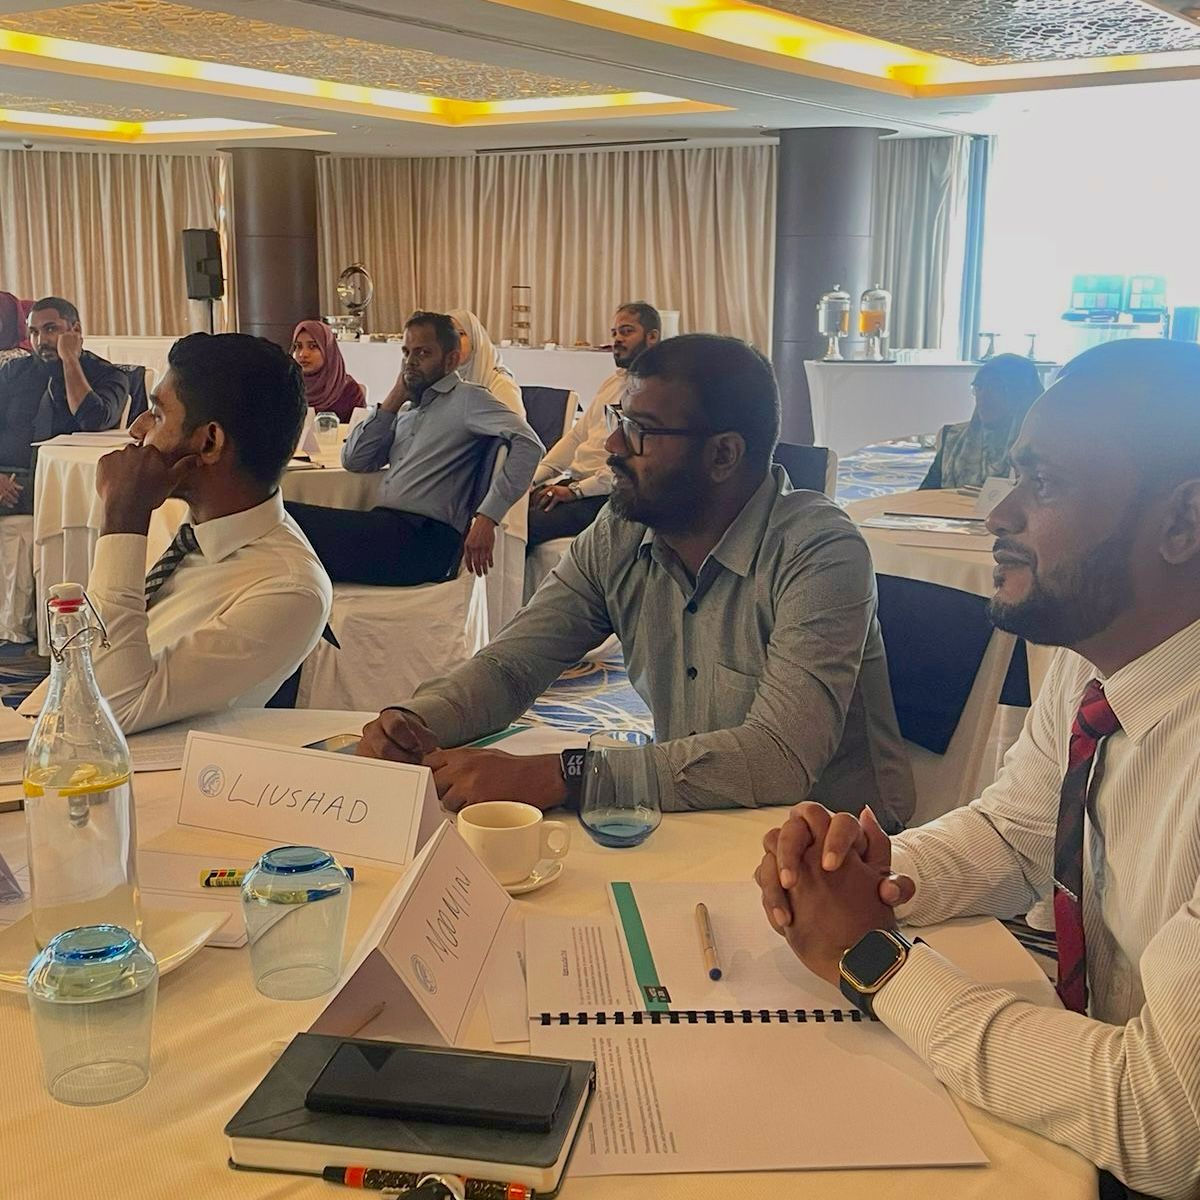 The Workshop on Evidence & Criminal Procedure, organised in partnership with @MPF_heidelberg, has kicked off! We are excited for this opportunity for our criminal defence Bar Members to engage & learn from our line-up of international & local experts. #CPD #RaisetheBarMV